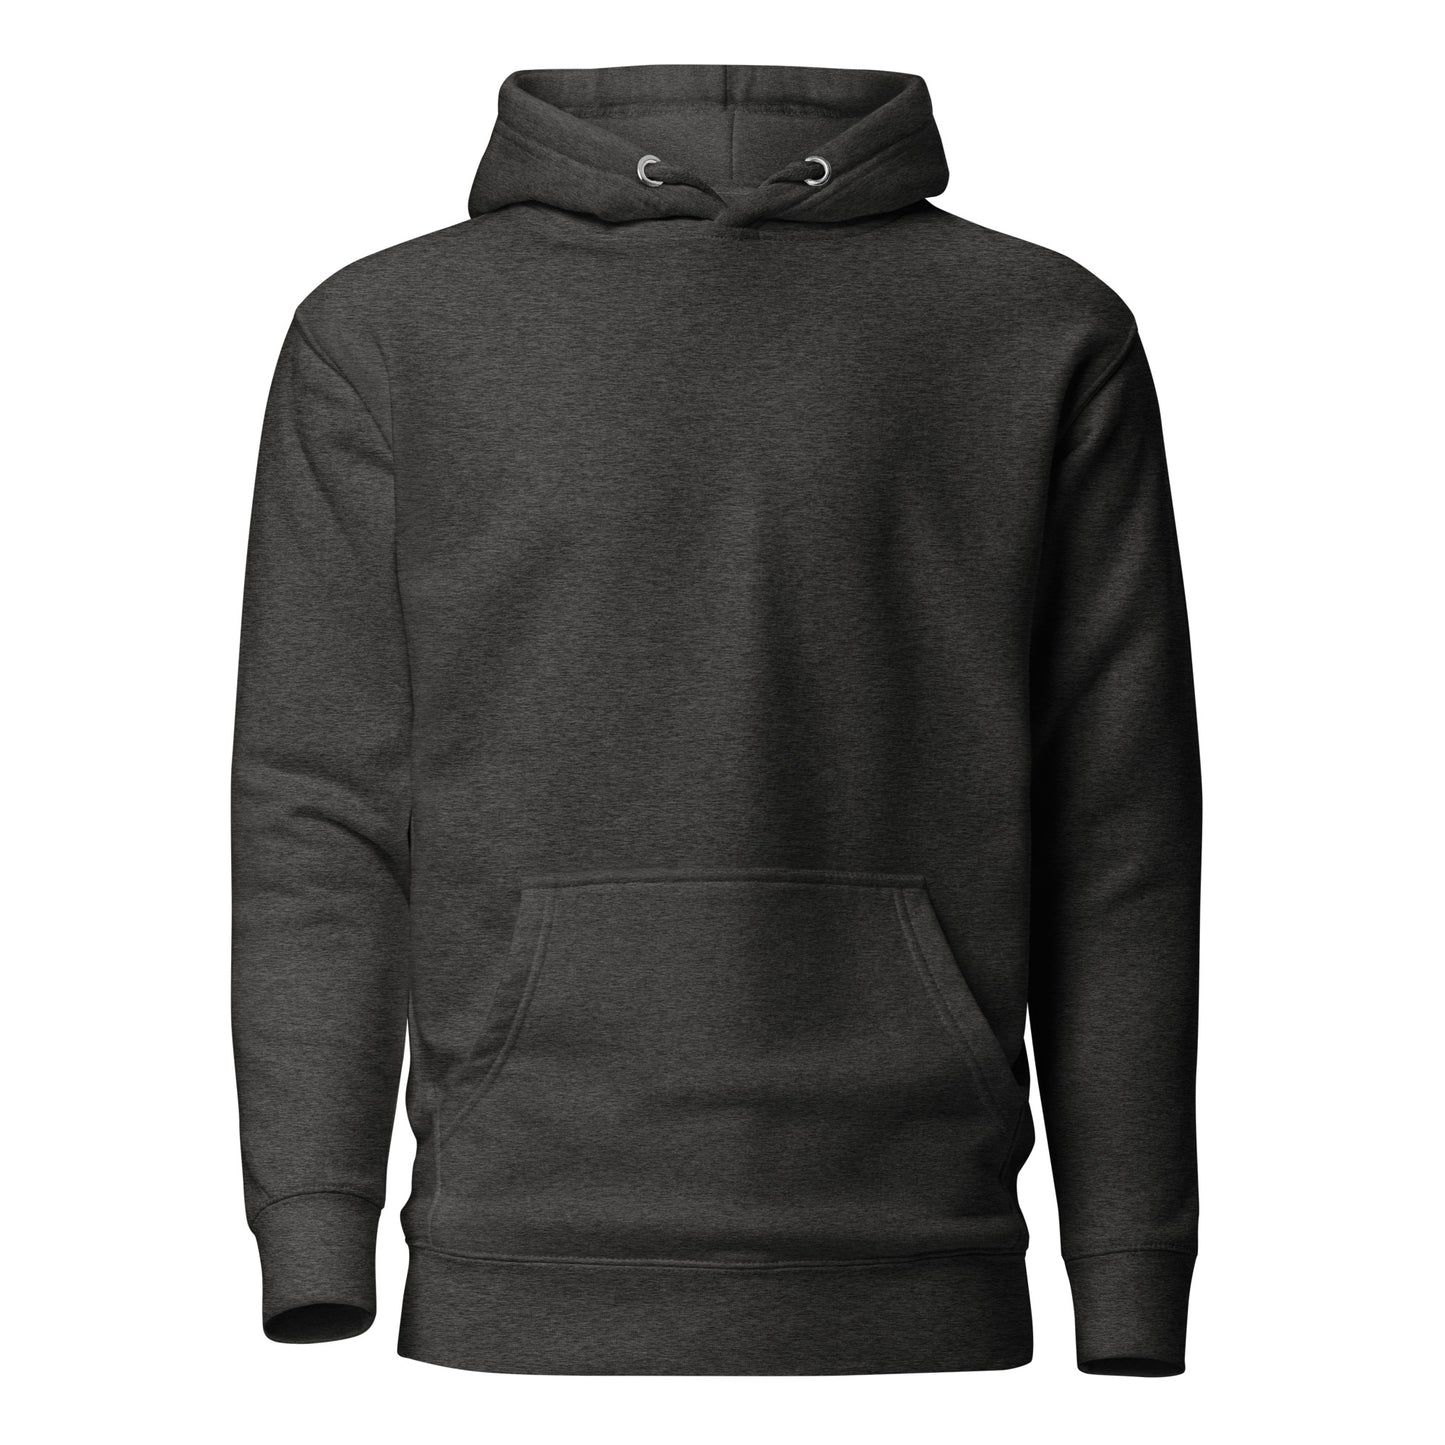 All You Have to Do is Fly Quality Cotton Heritage Adult Hoodie